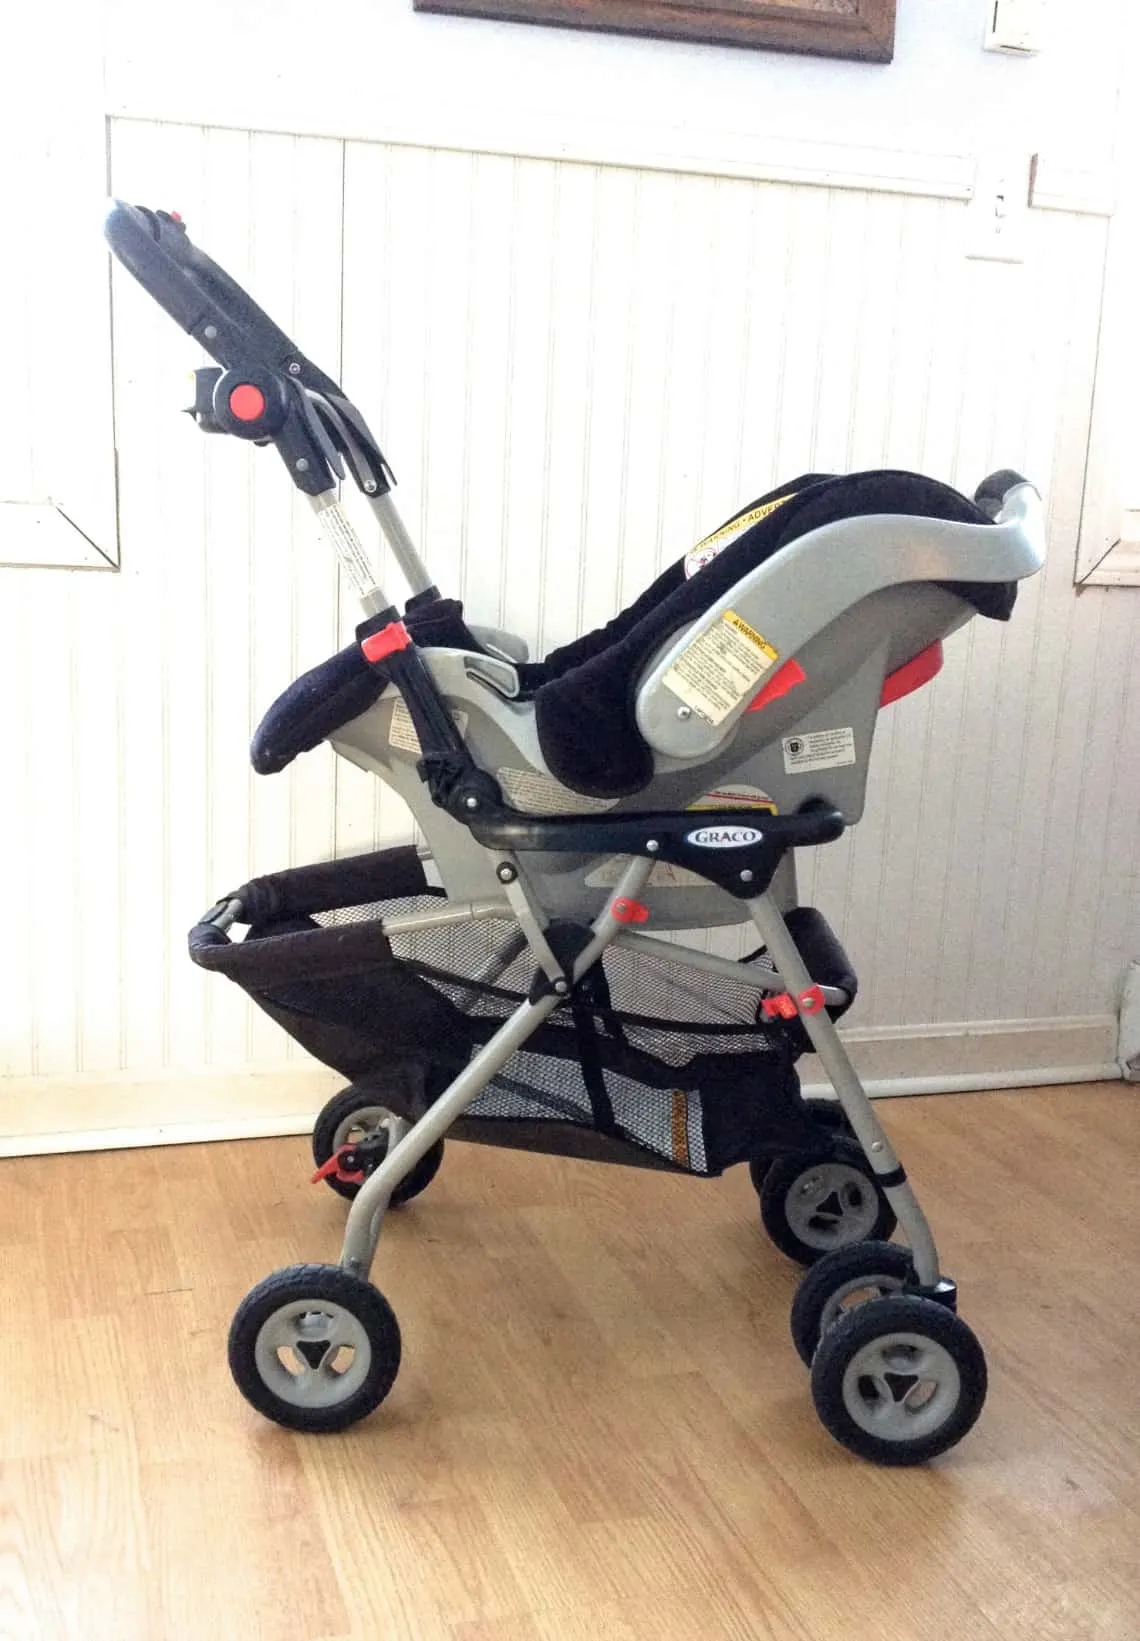 Stroller frame with car seat attached.